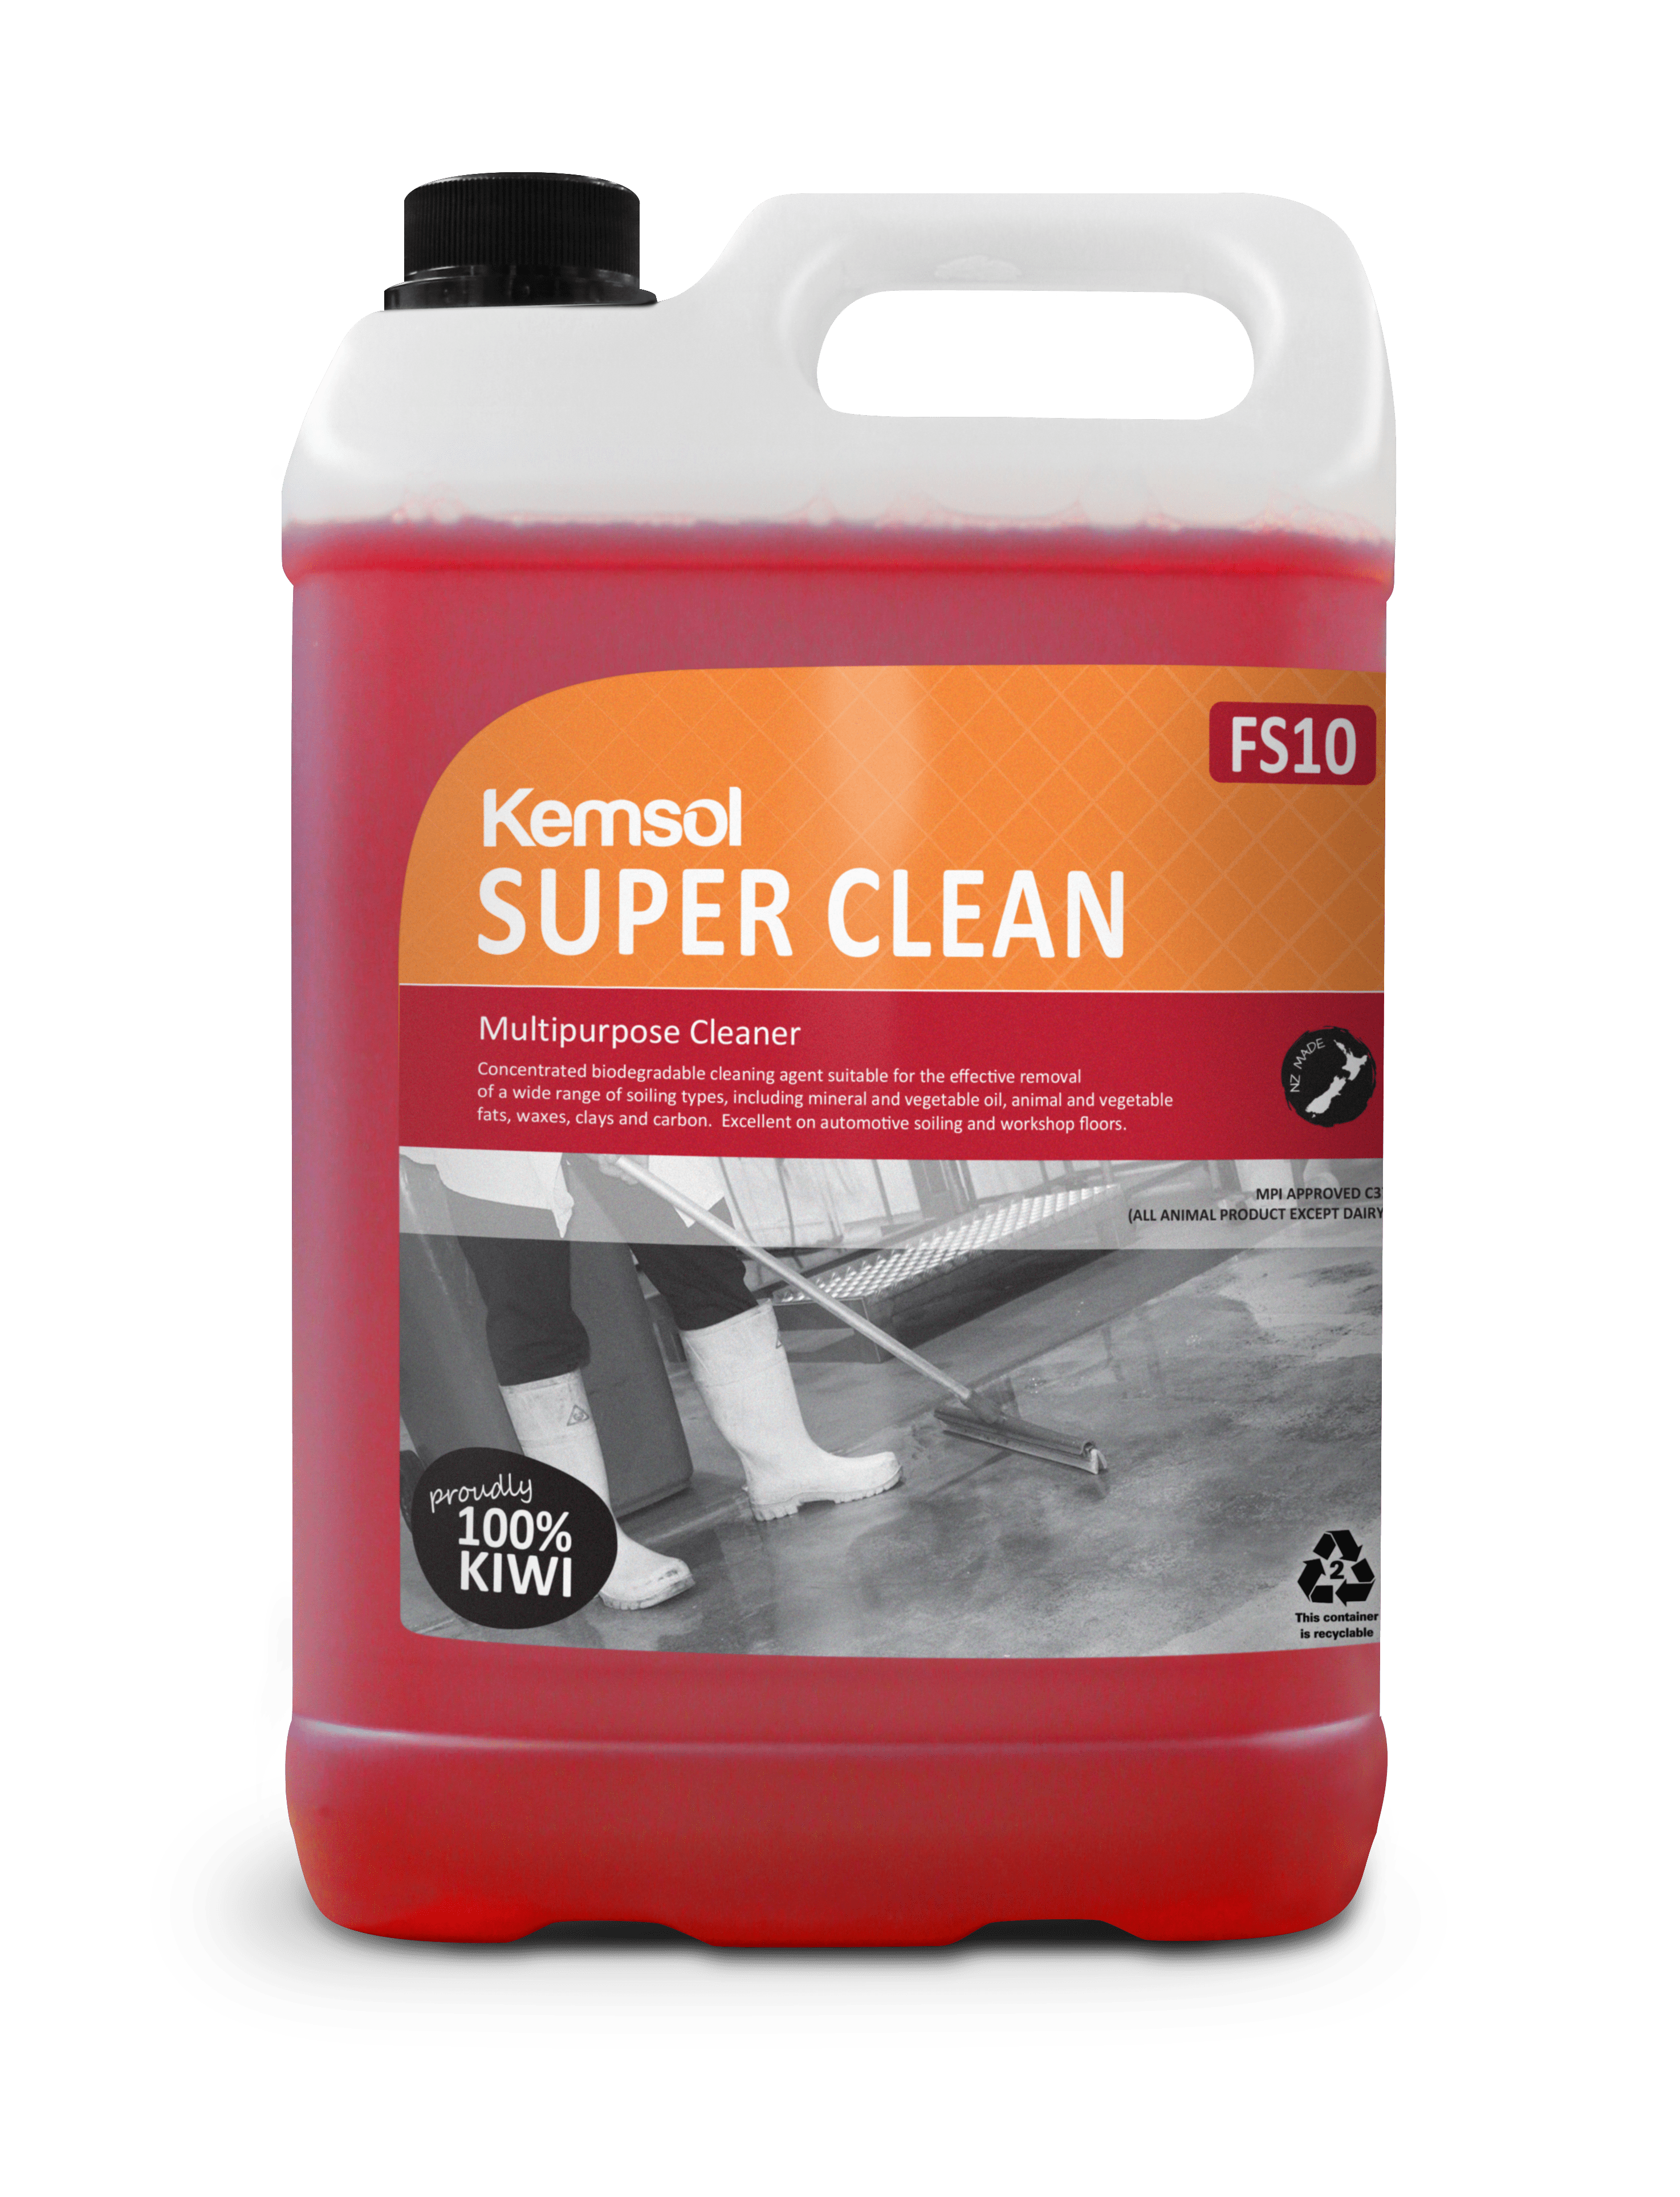 Super Clean - Creating quality chemicals for a cleaner environment